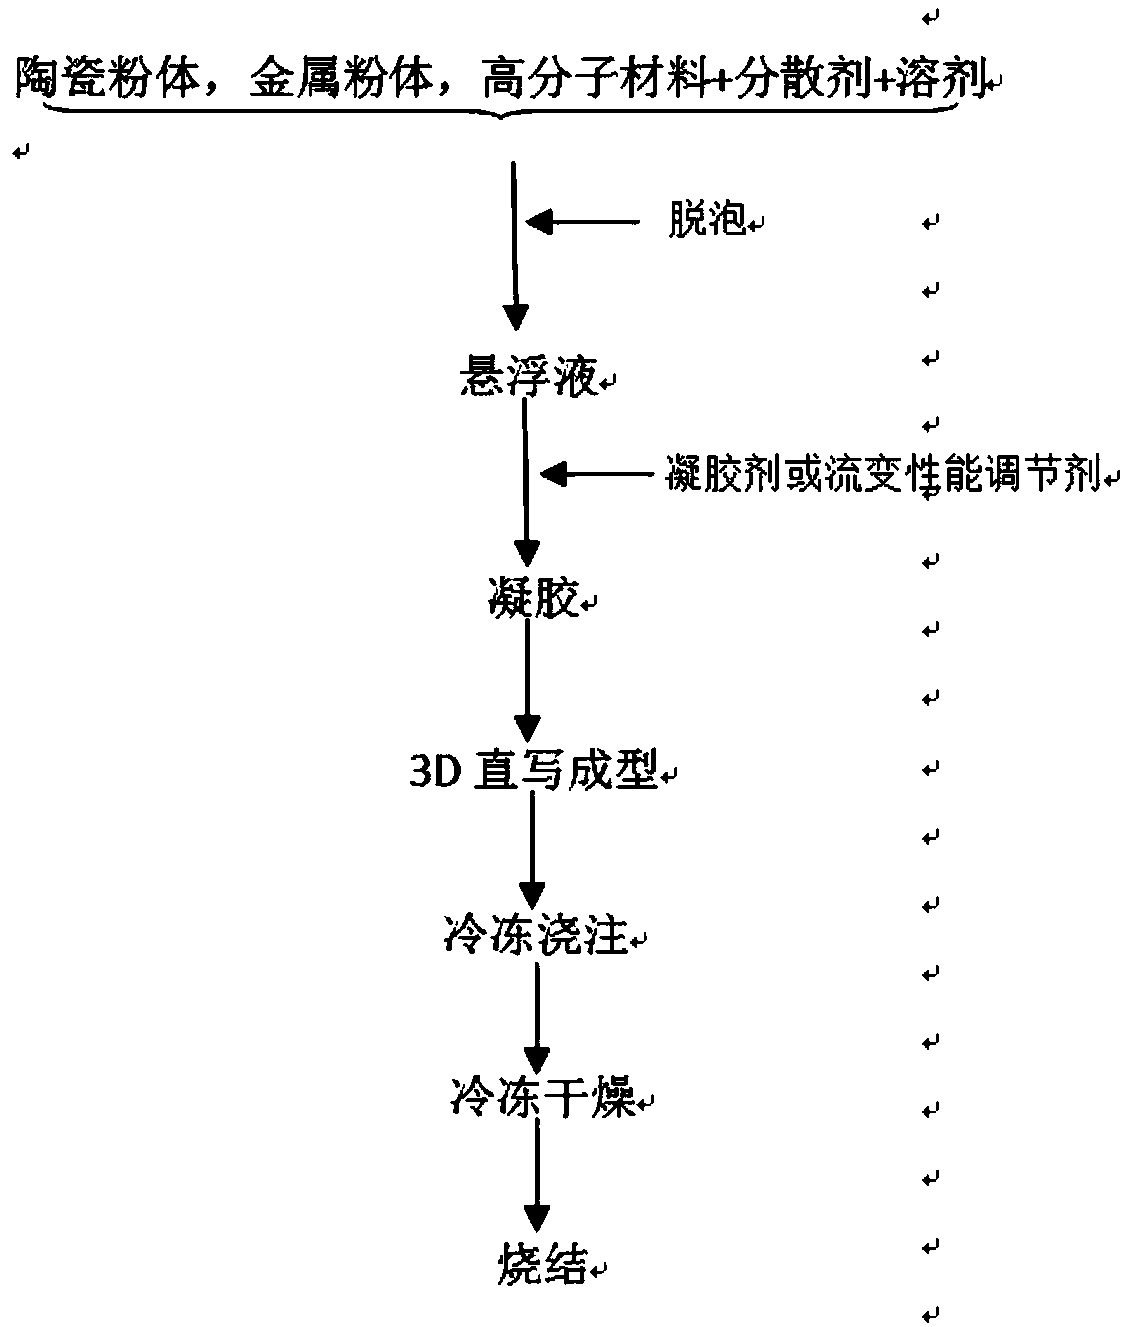 Method for preparing material with controllable macro and micro structures